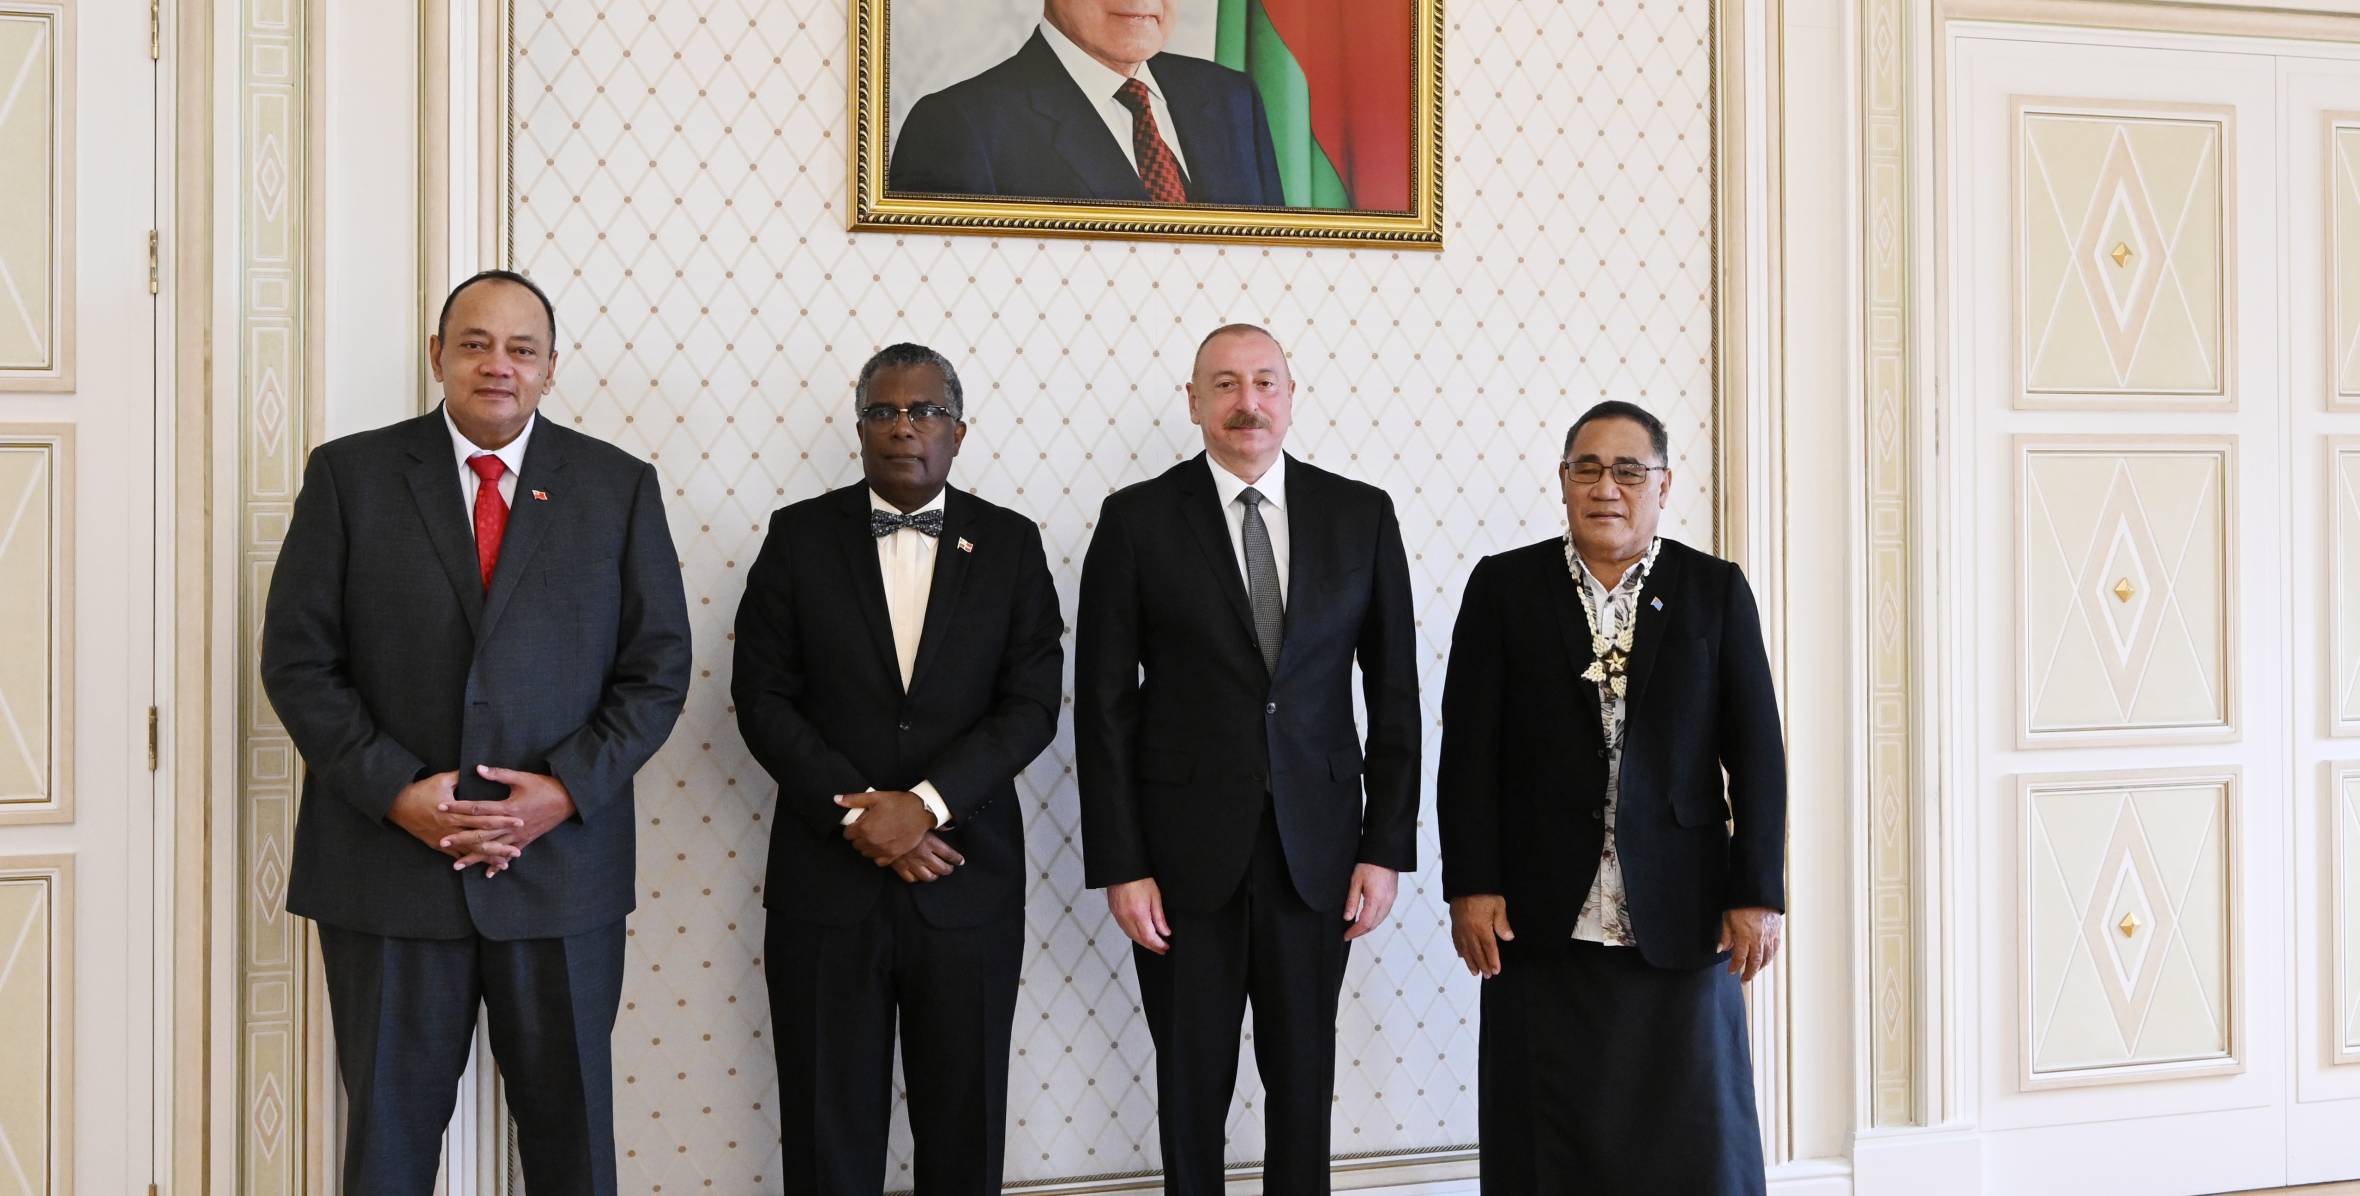 Ilham Aliyev received Governor-General of Tuvalu, Prime Minister of Tonga, Foreign Minister of the Commonwealth of the Bahamas